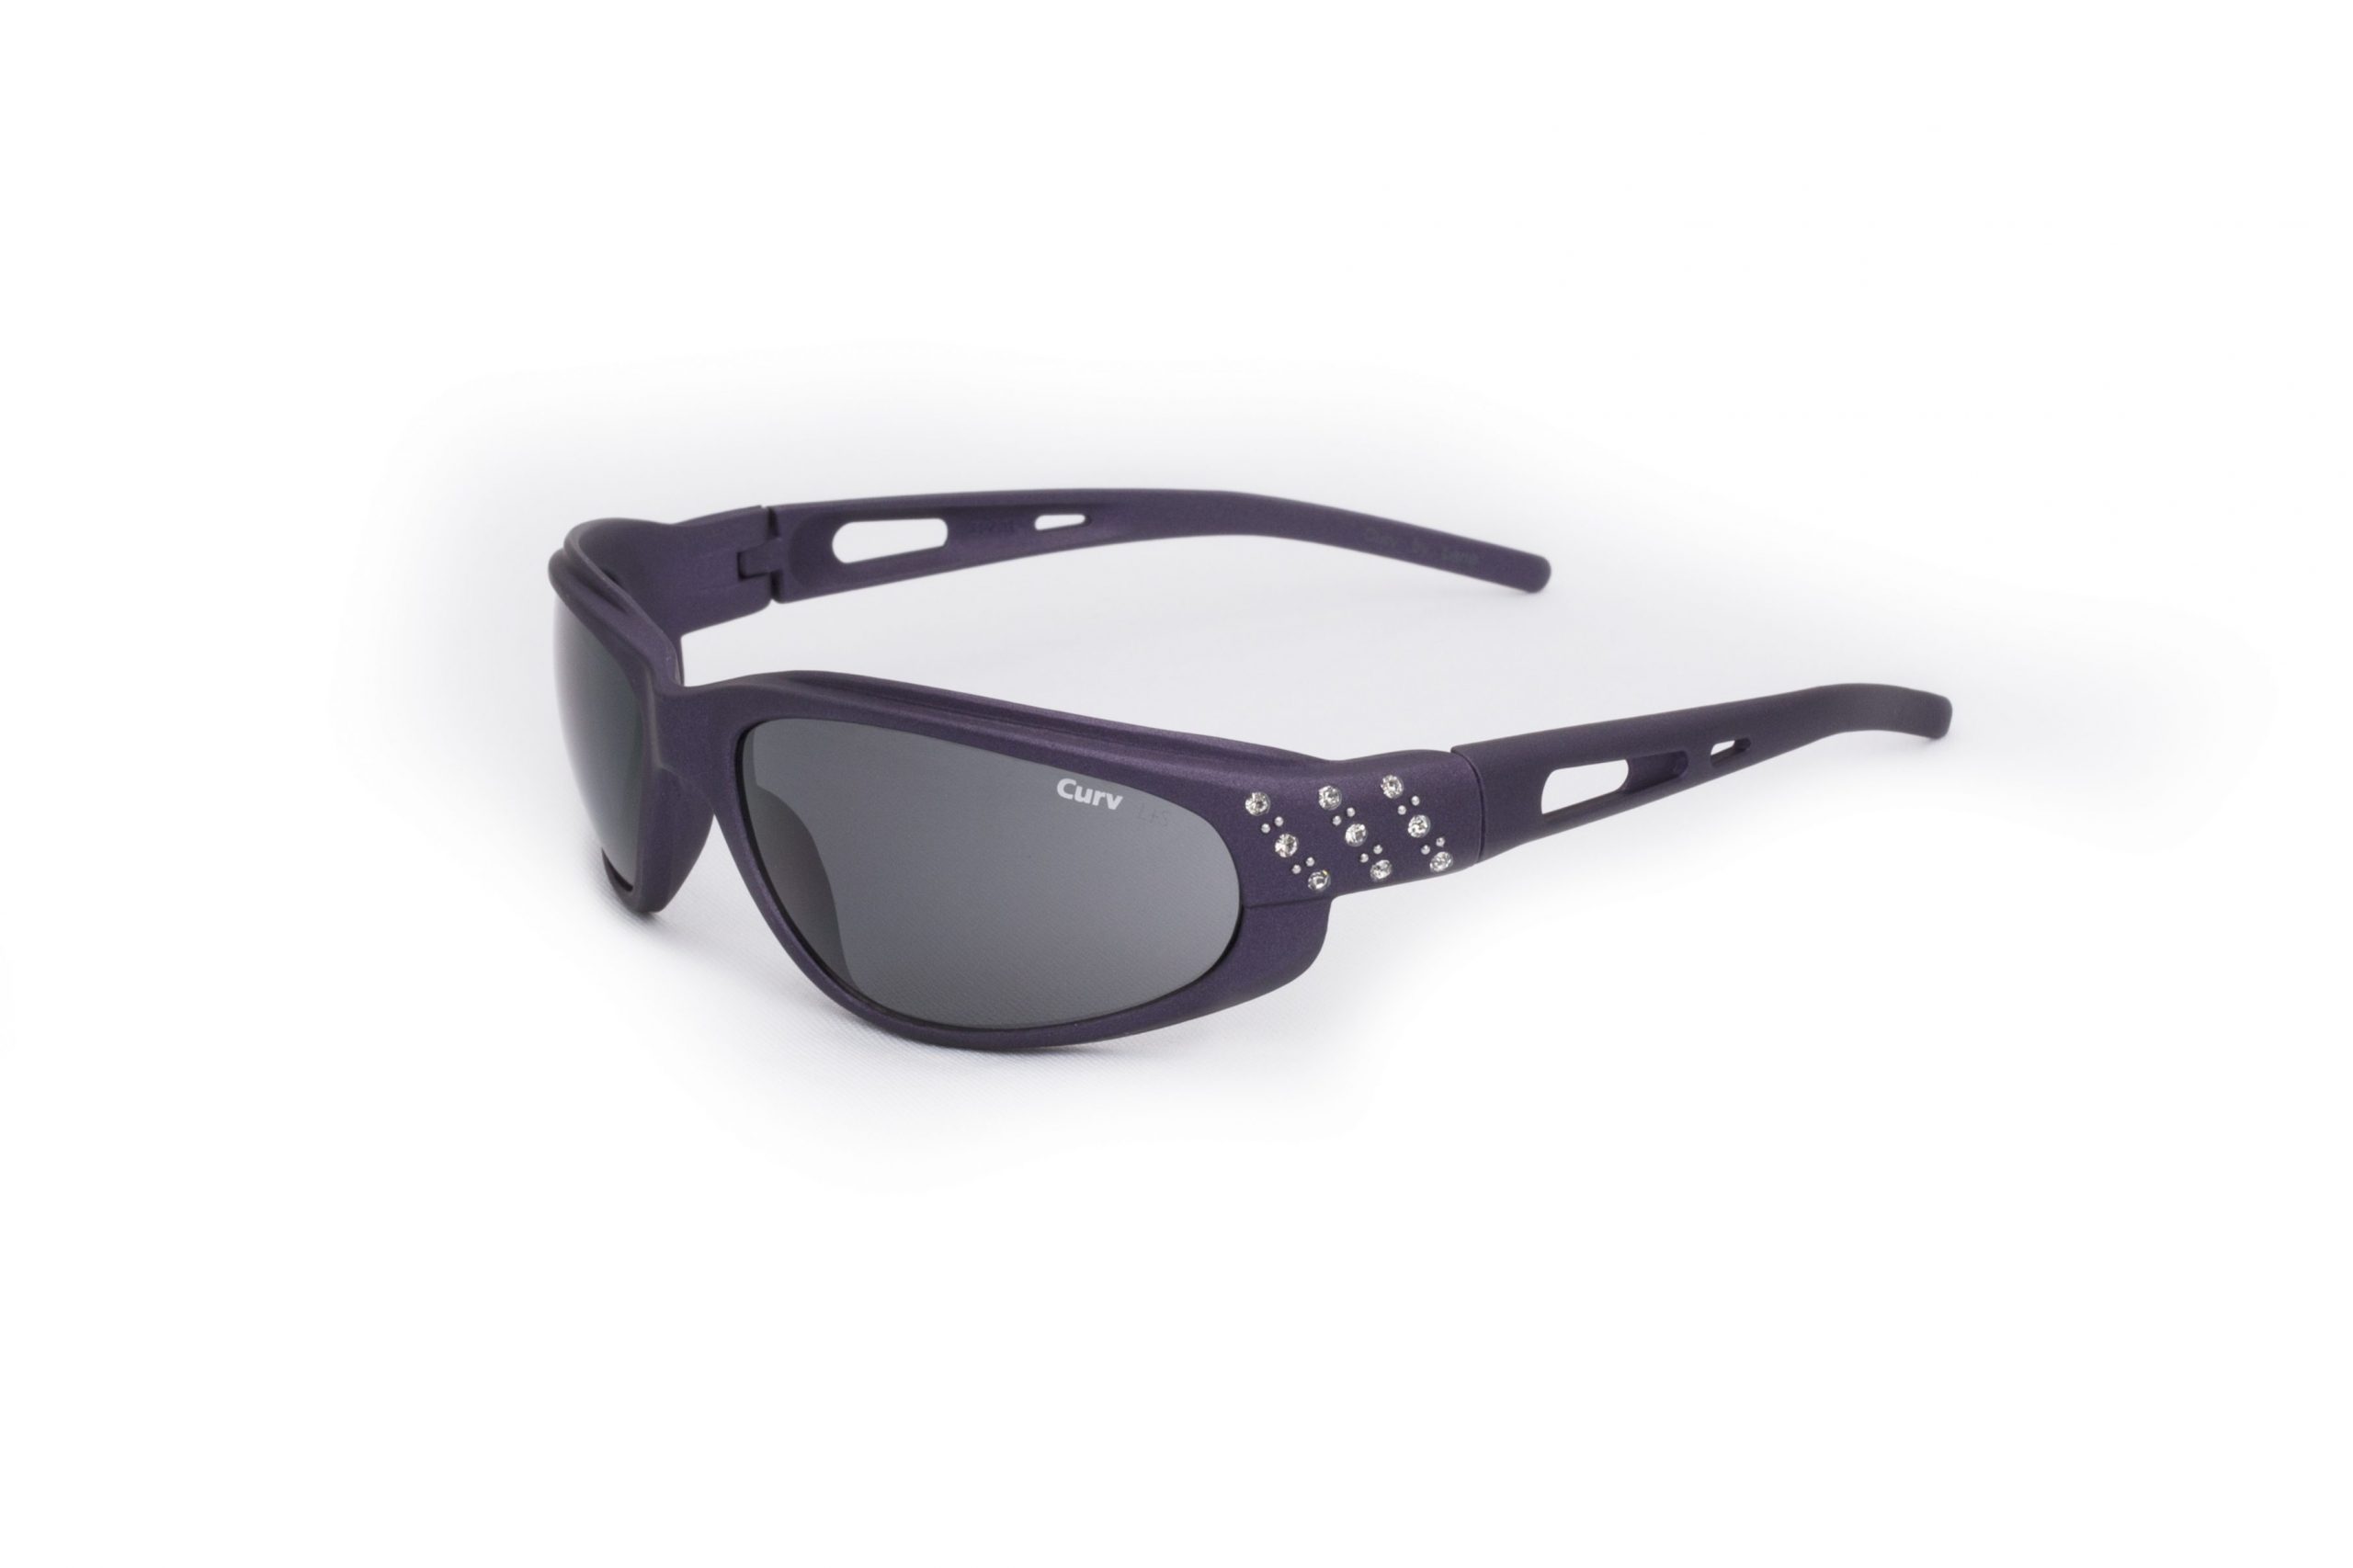 01-47 - Curv Purple Rhinestone Sunglasses with Smoke Lenses and Soft Touch Frames